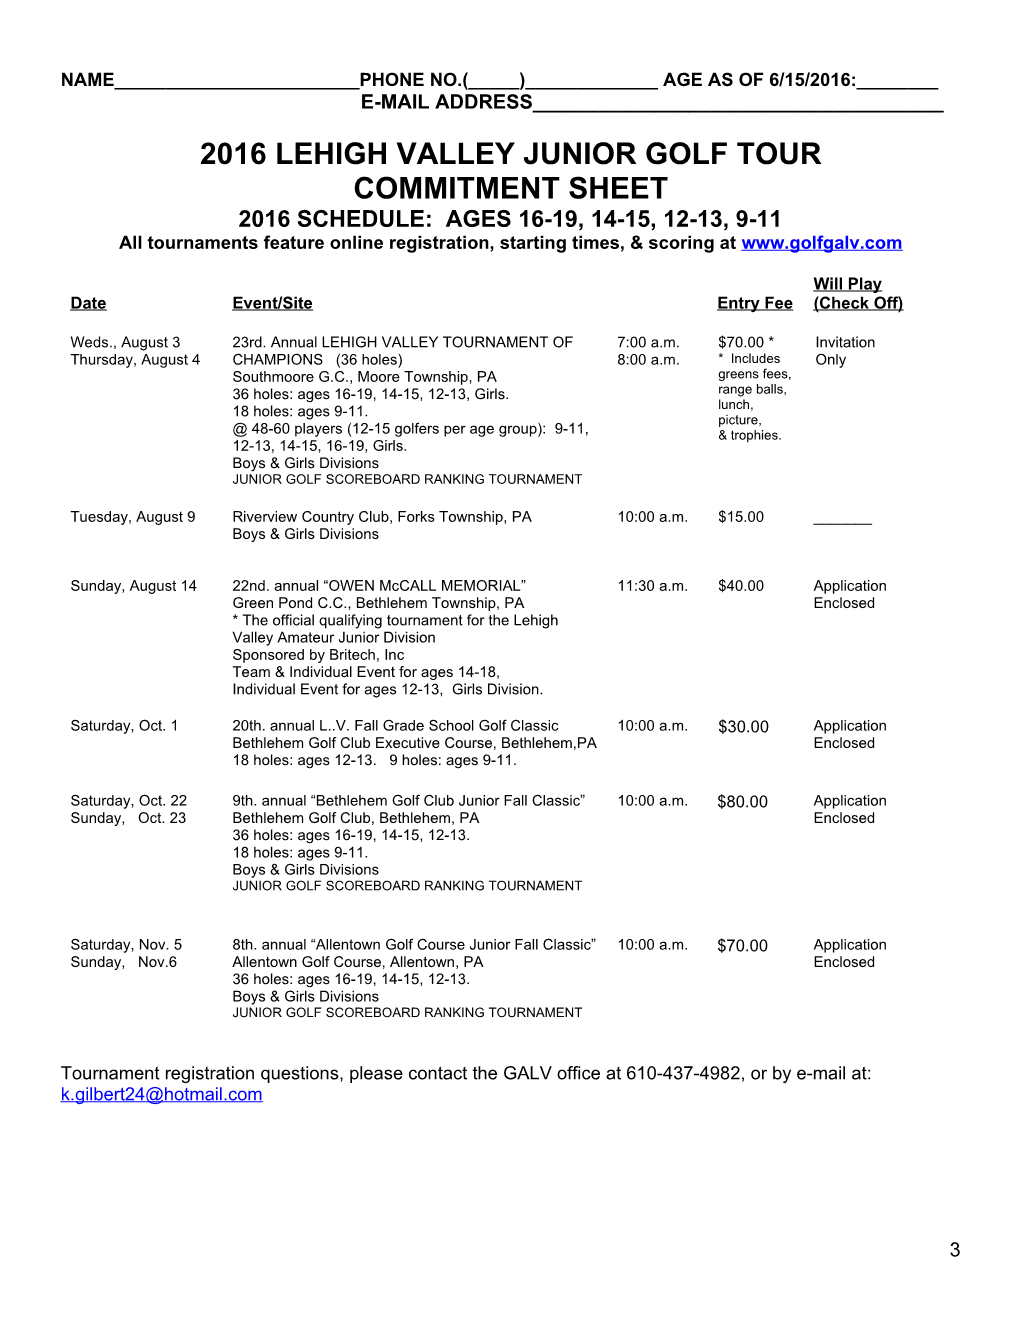 Commitment Sheets for 10-12, 13-14